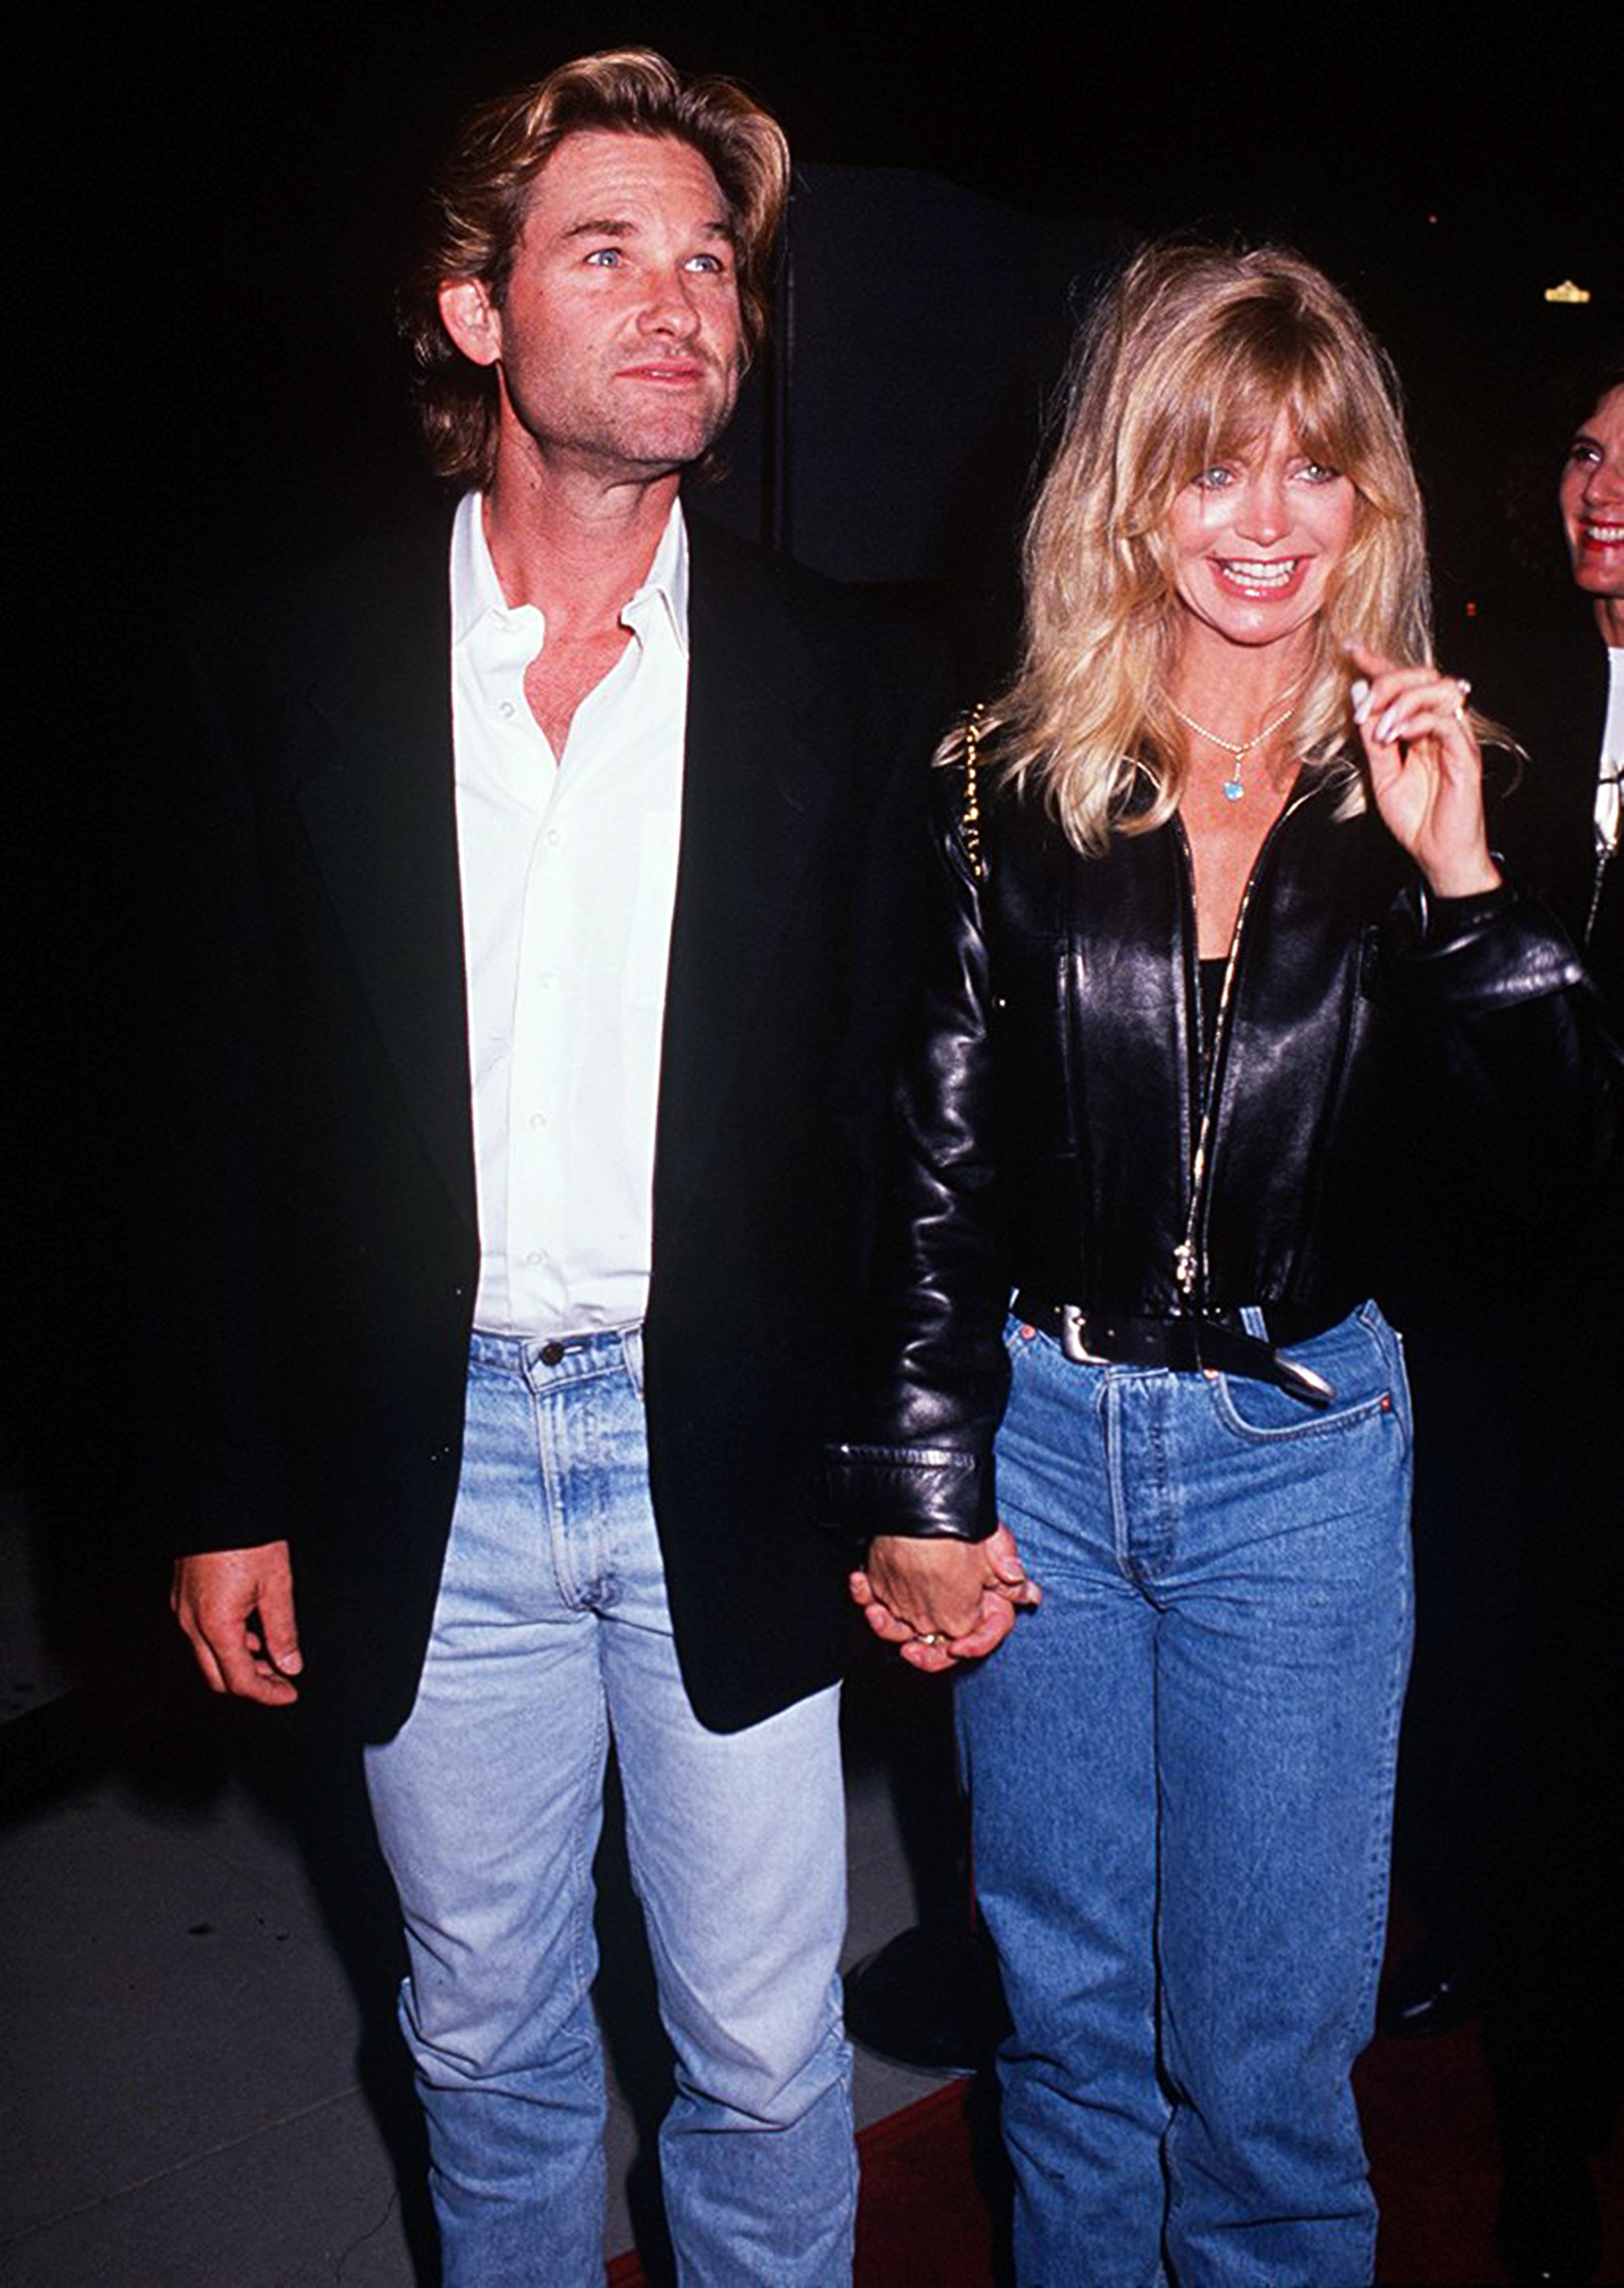 American actress Goldie Hawn with her partner, actor Kurt Russell at the "Housesitter" Beverly Hills premiere at the Academy Theatre on June 9,1992 in Beverly Hills, California | Source: Getty Images